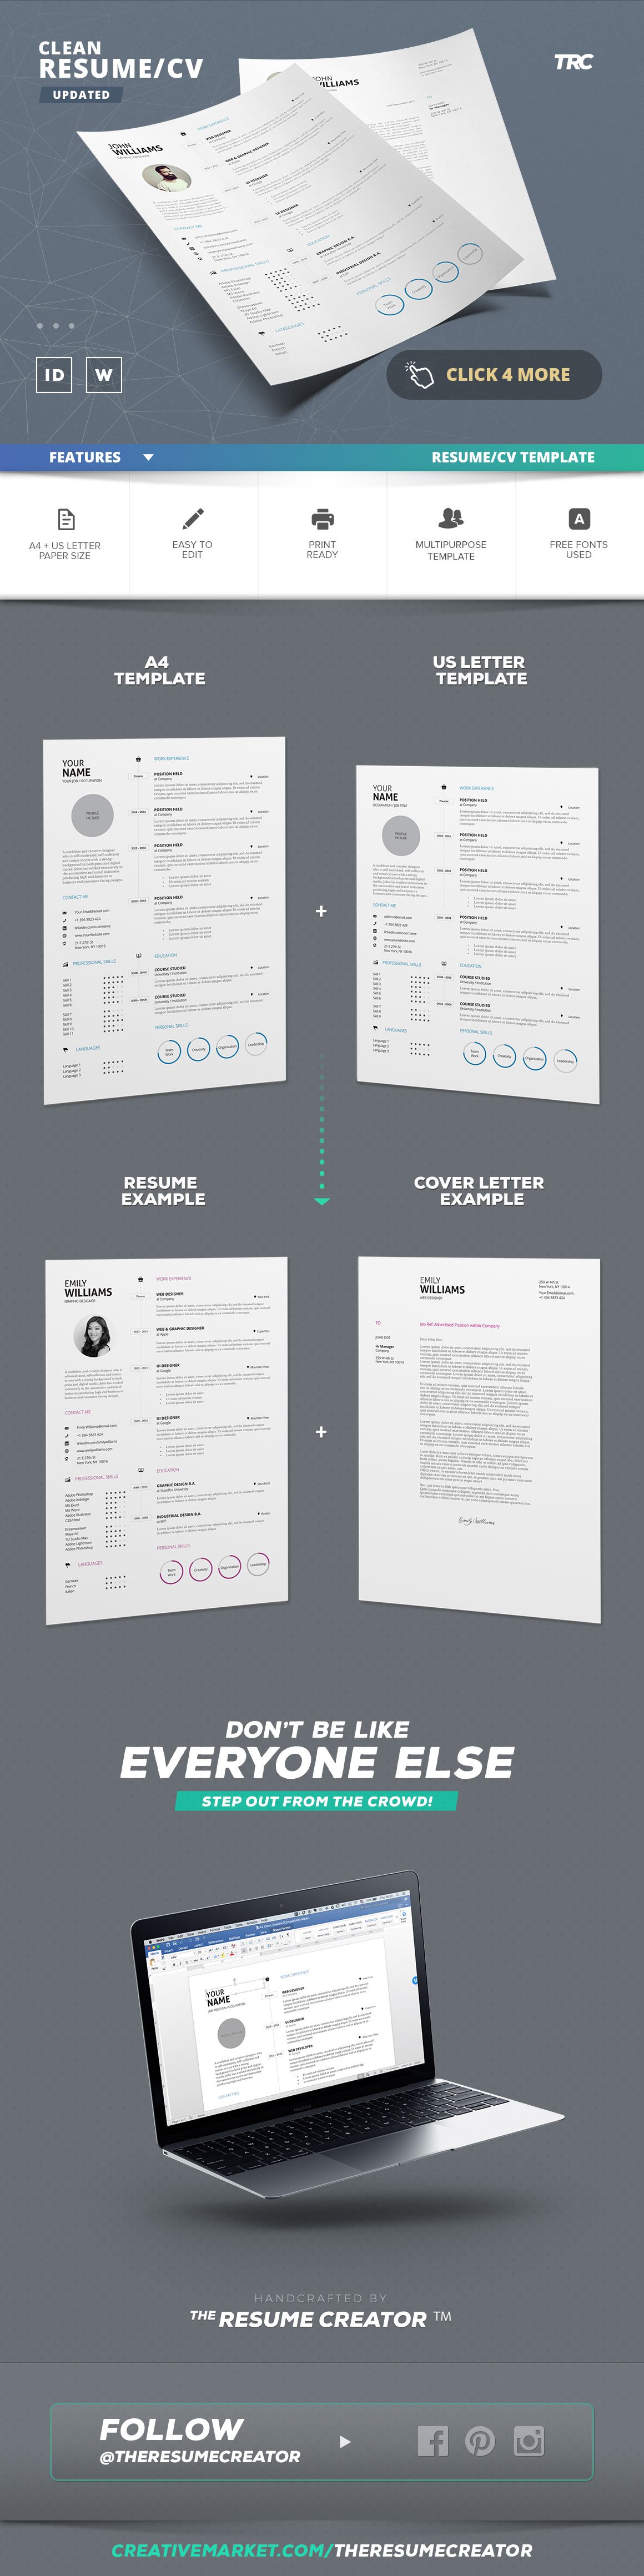 Clean Resume/Cv Template Volume 4 preview image.